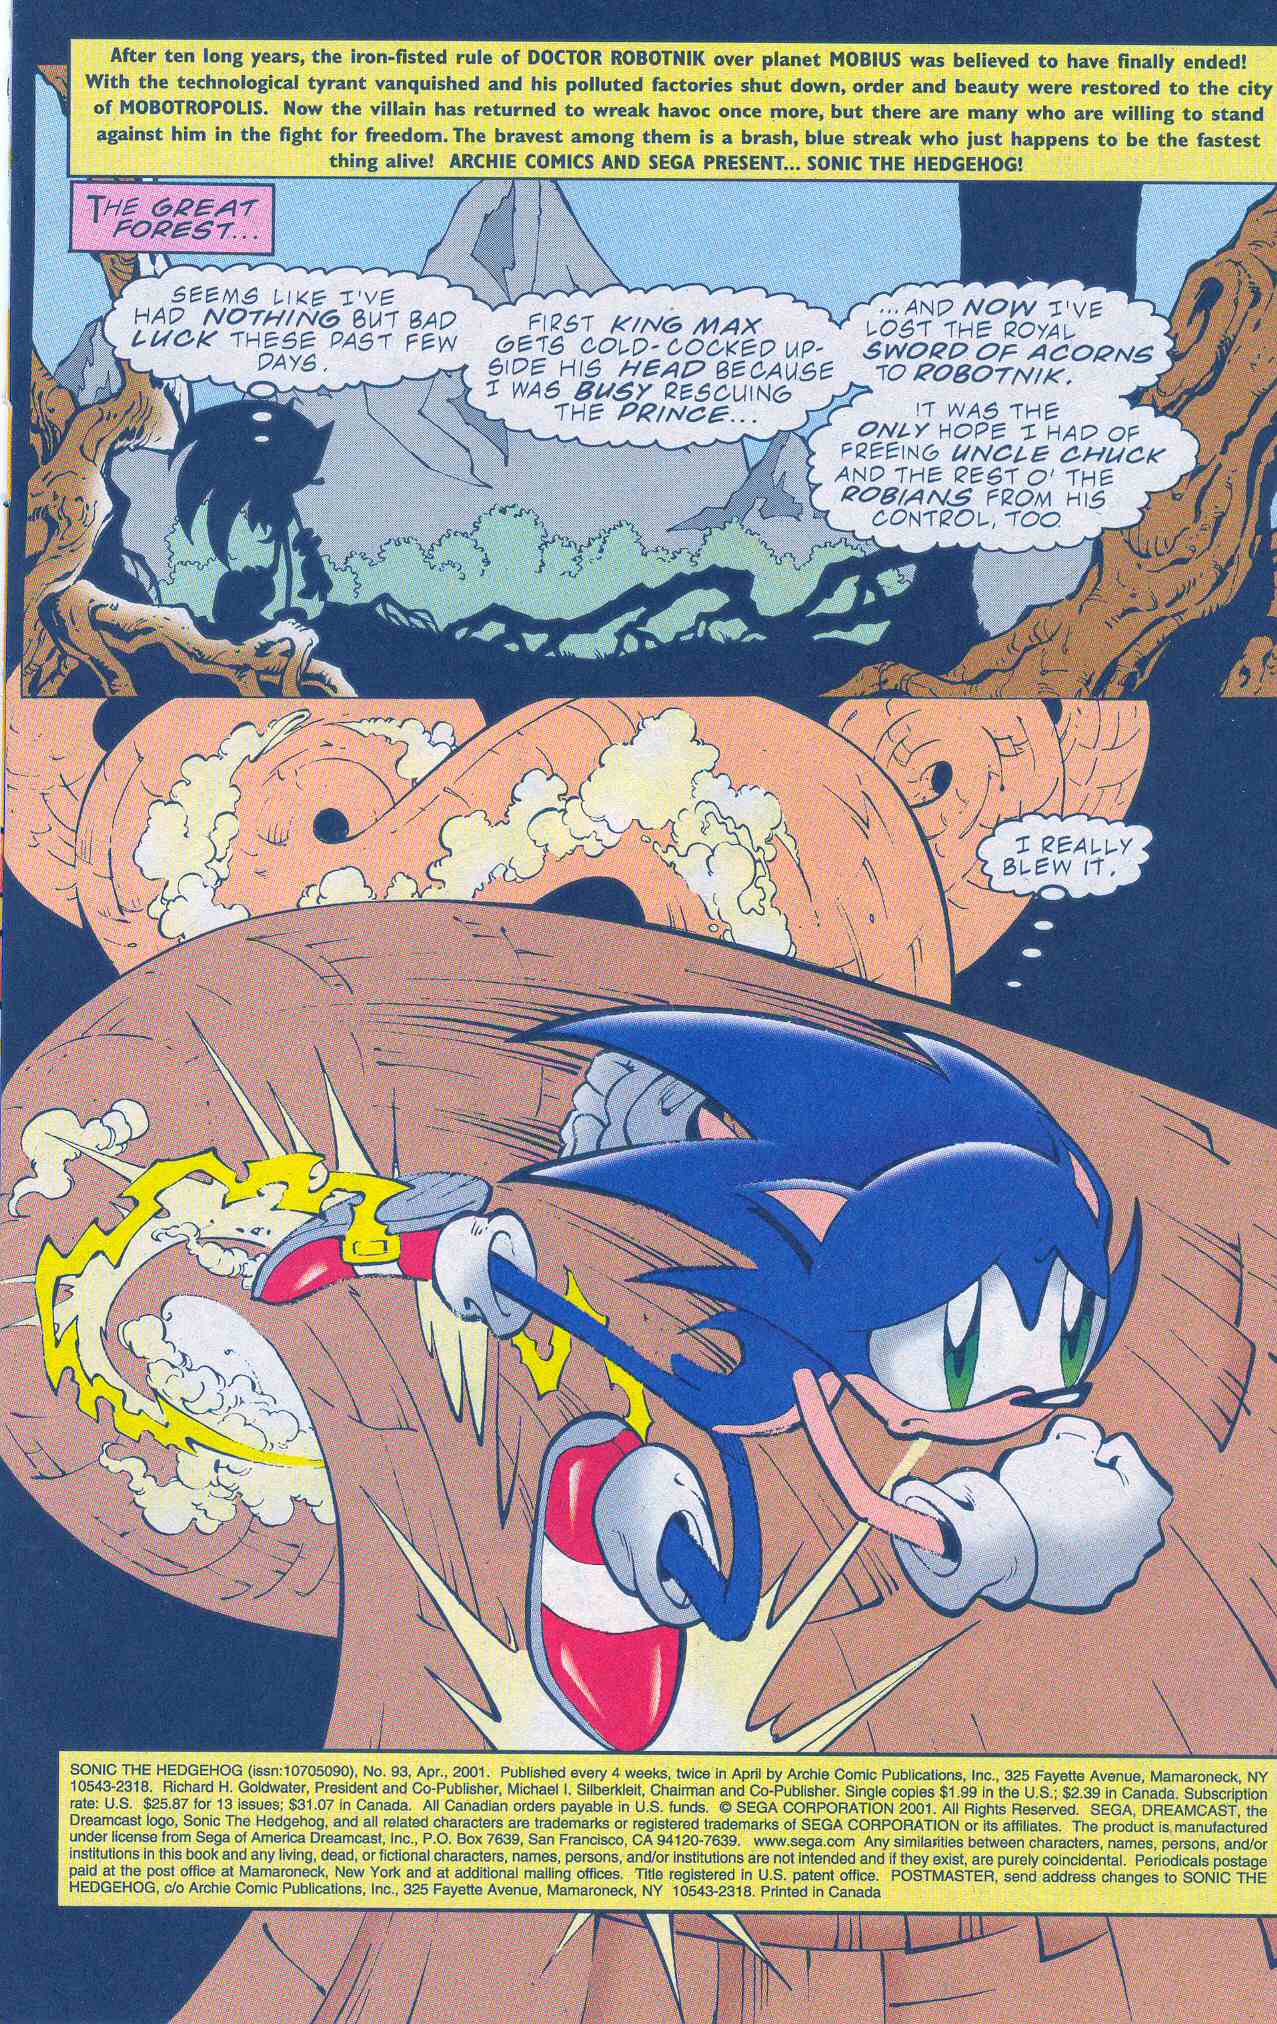 Sonic The Hedgehog (1993) 93 Page 1